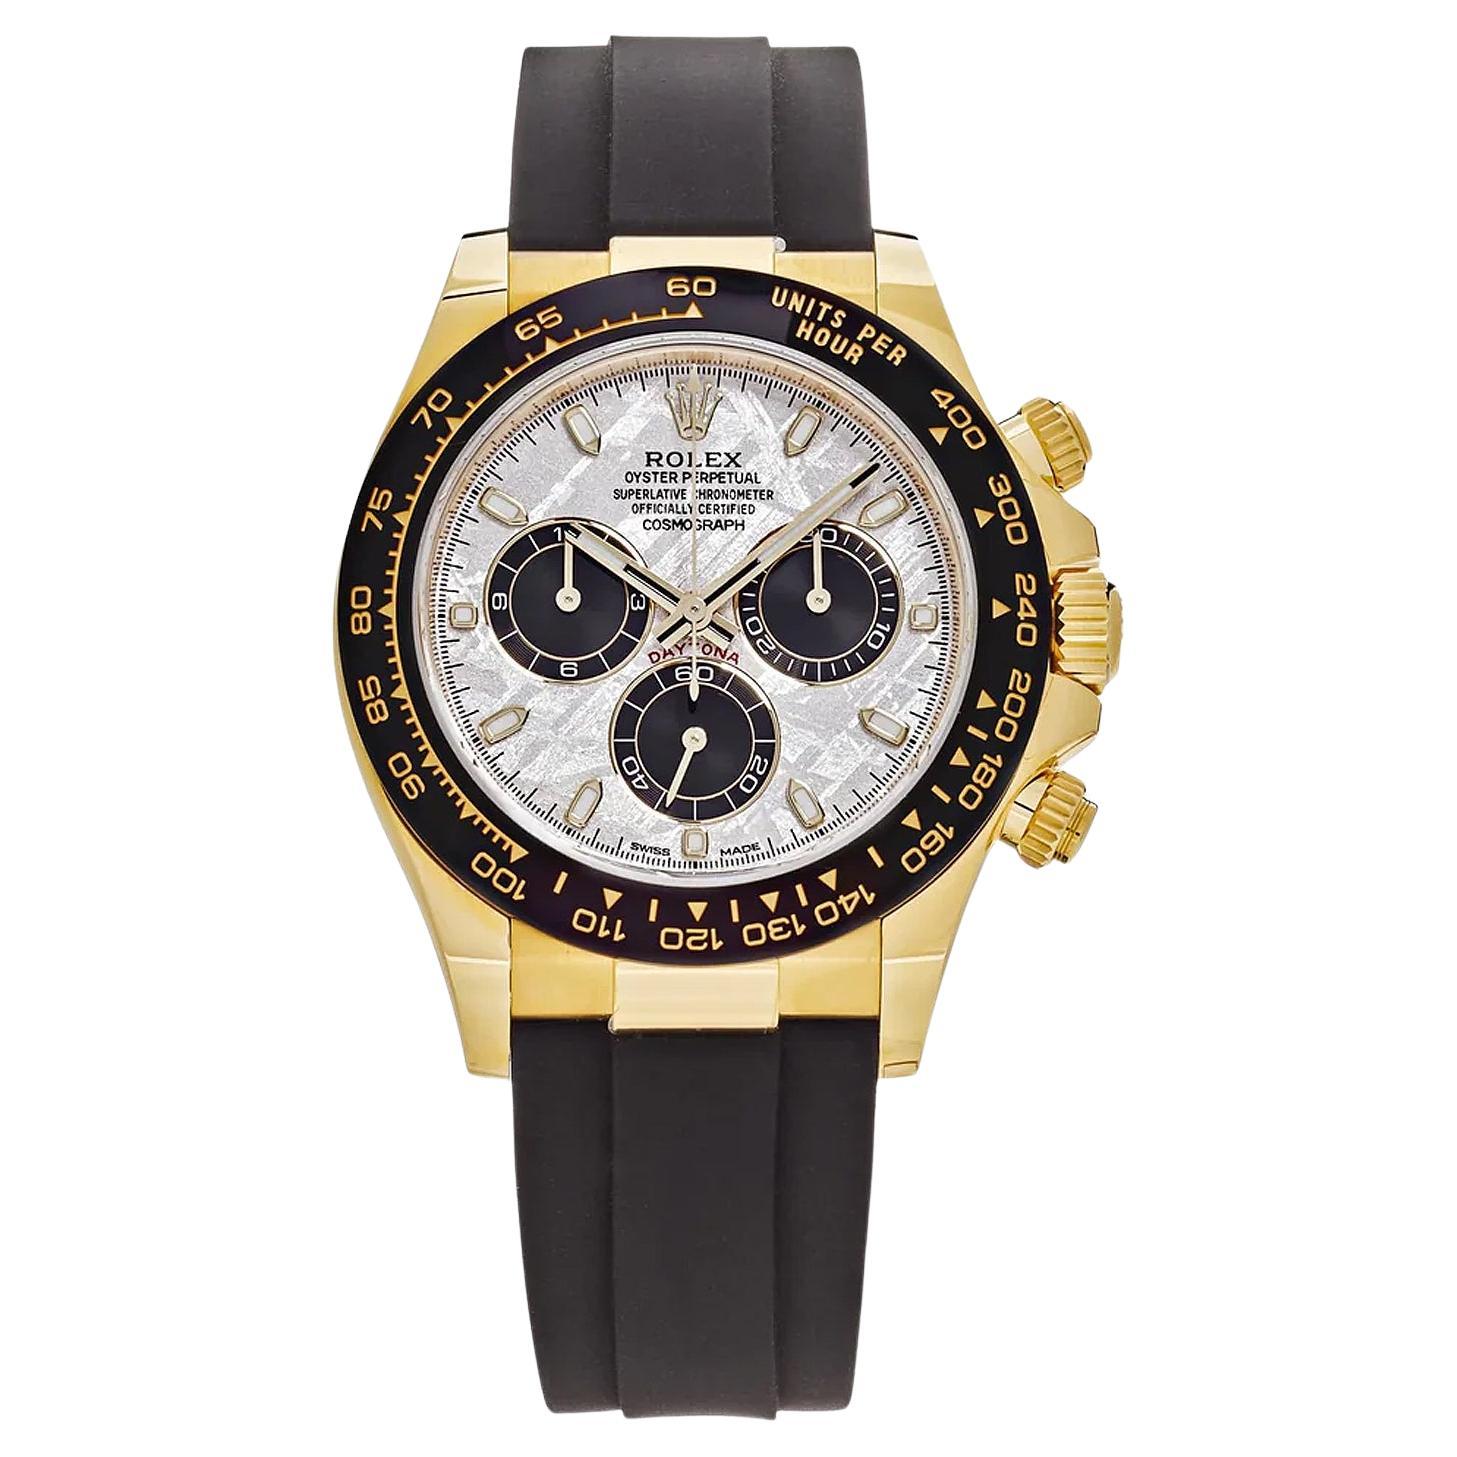 Rolex Cosmograph Daytona 40 Meteorite Dial Oysterflex Yellow Gold Watch 116518LN For Sale